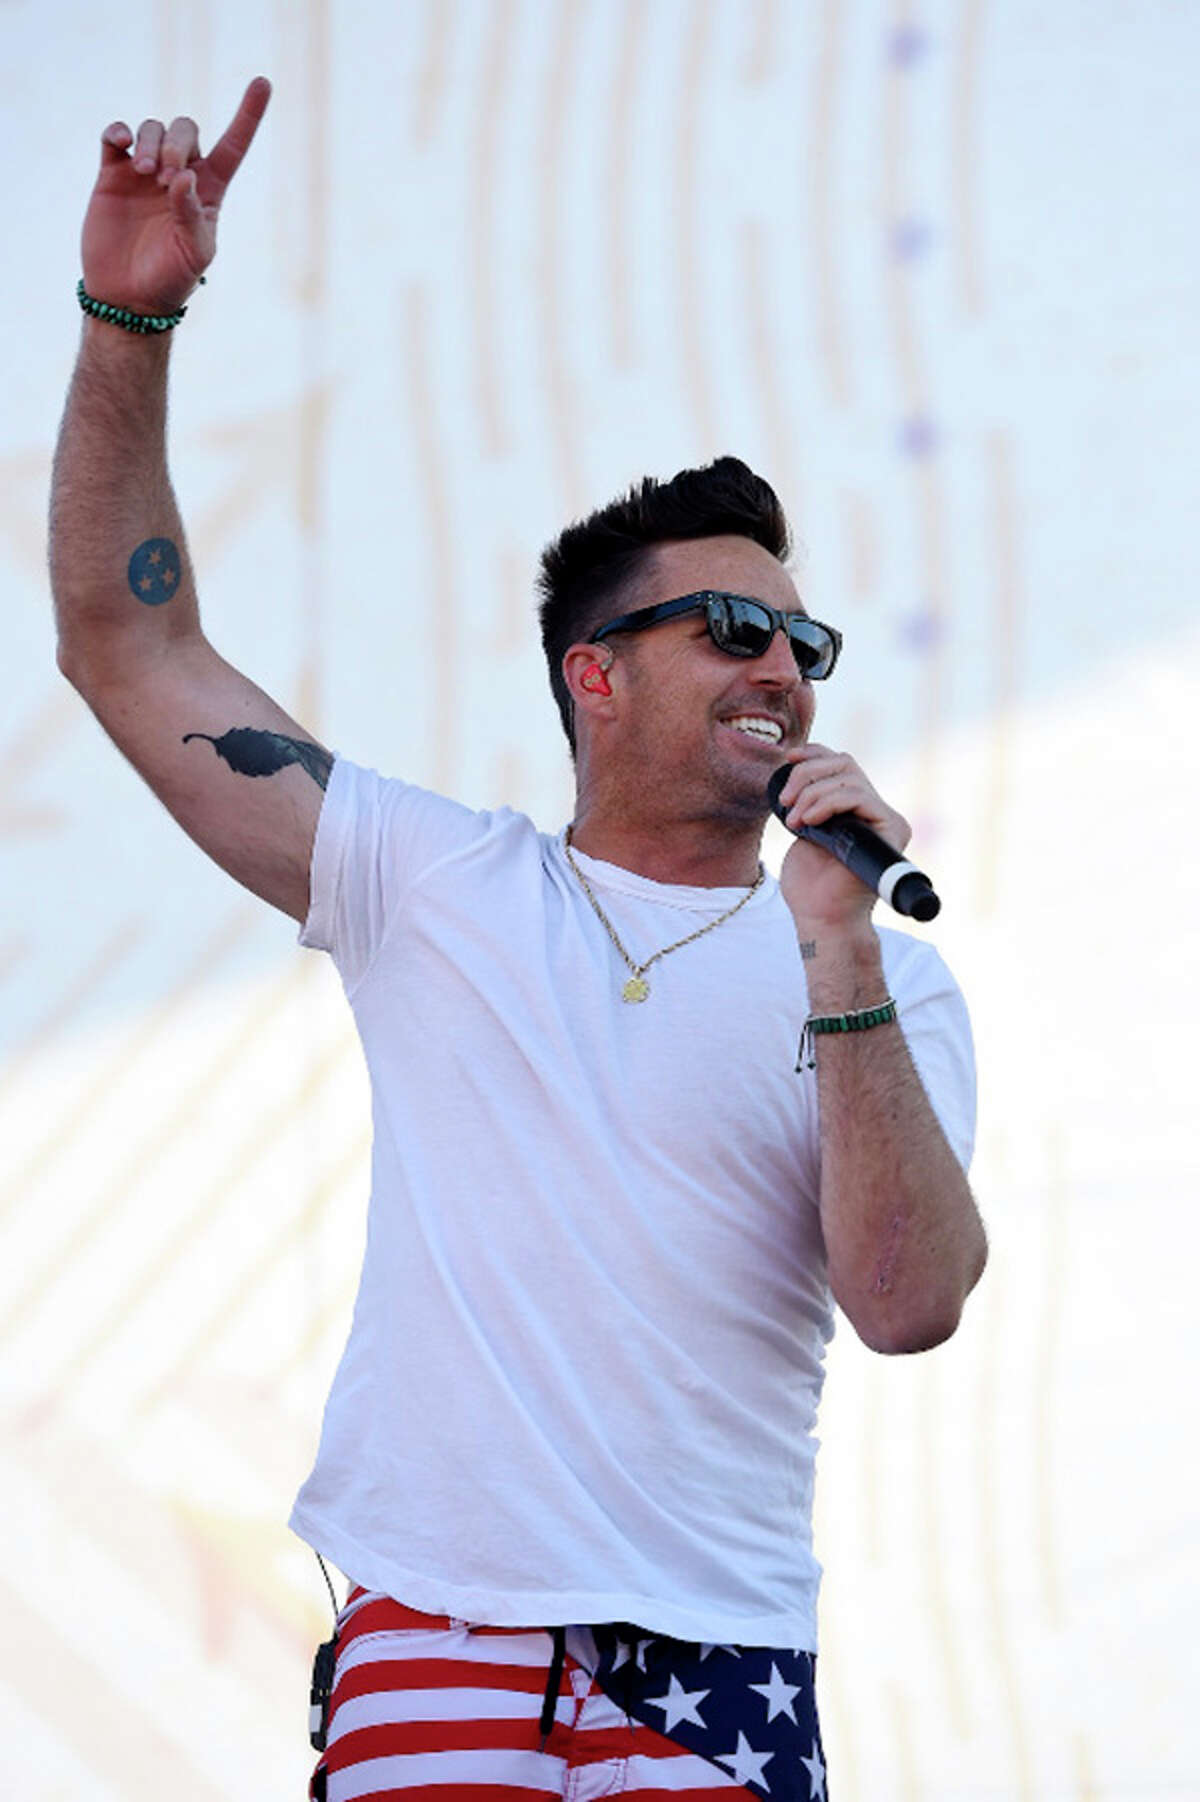 Jake Owen will be performing at Fair Saint Louis, which is scheduled July 1 through July 3 in Forest Park.